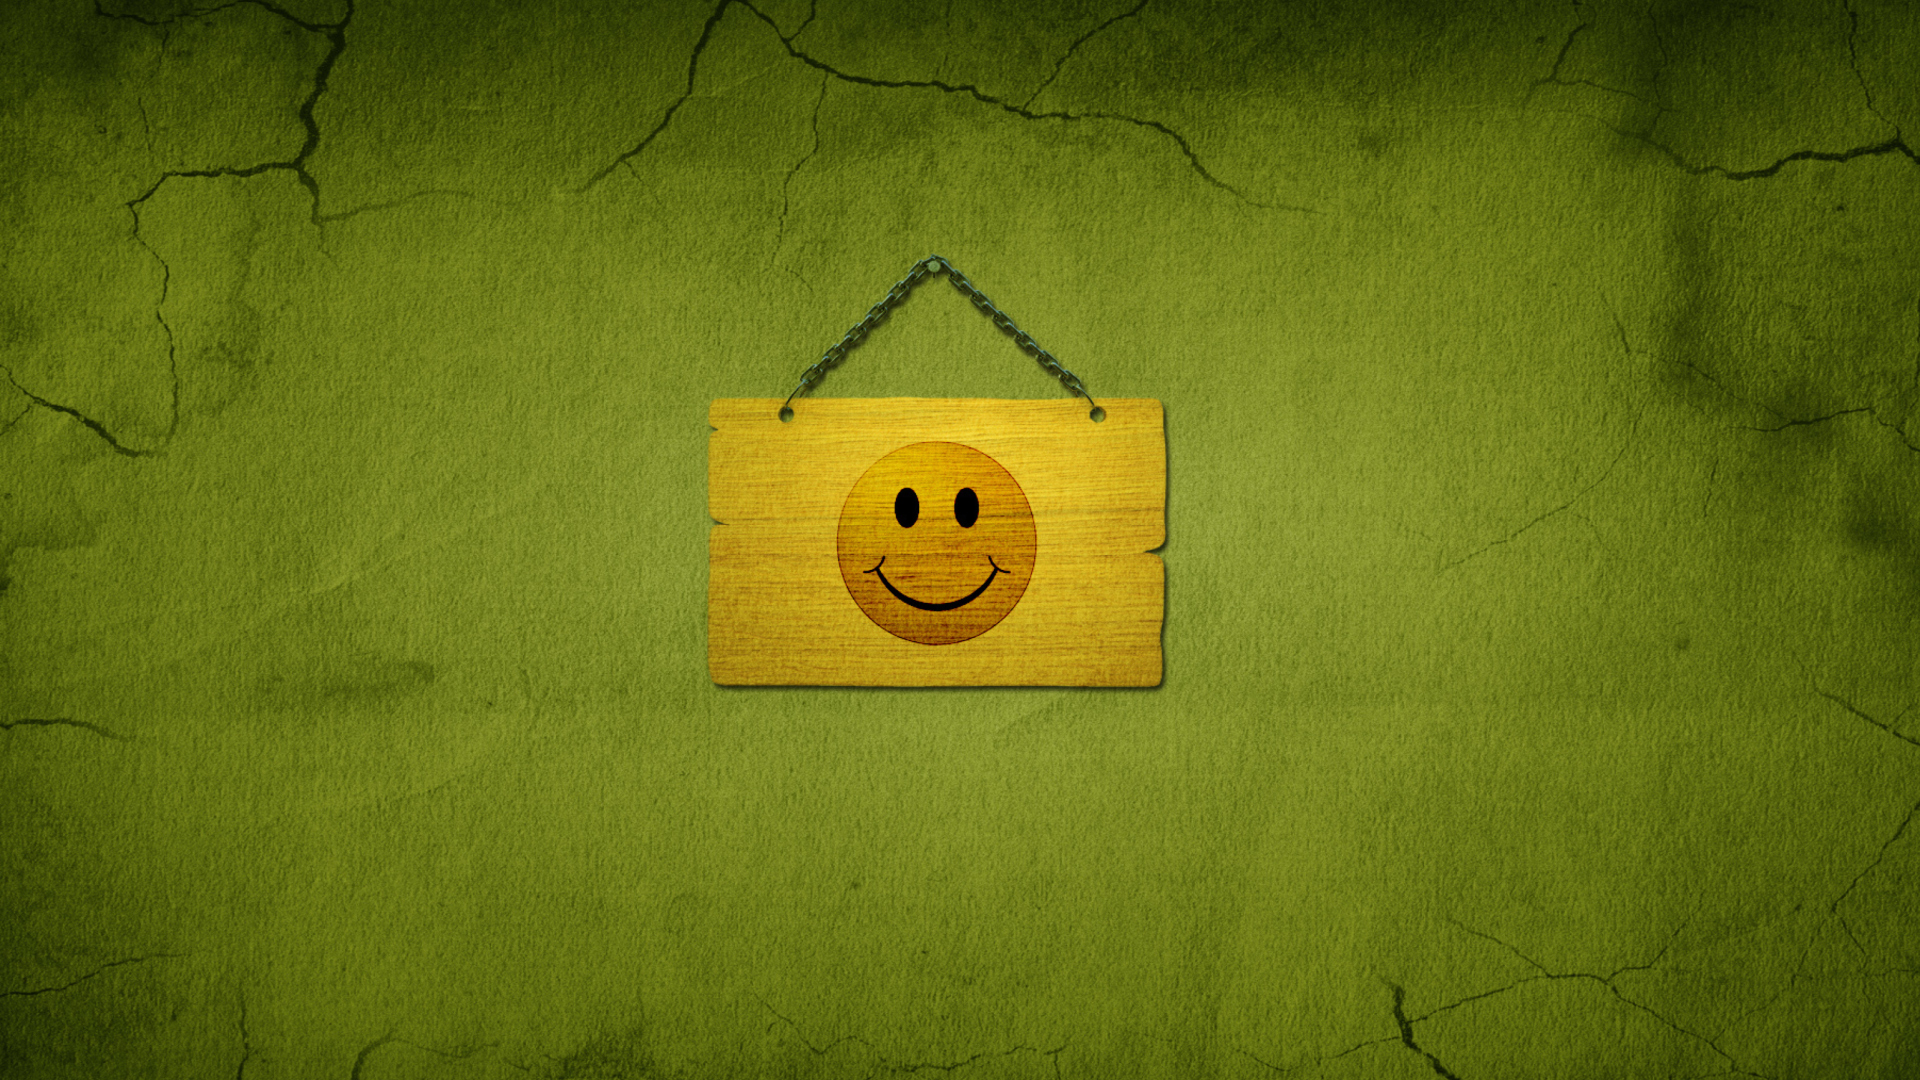 Smiley Sign wallpaper 1920x1080